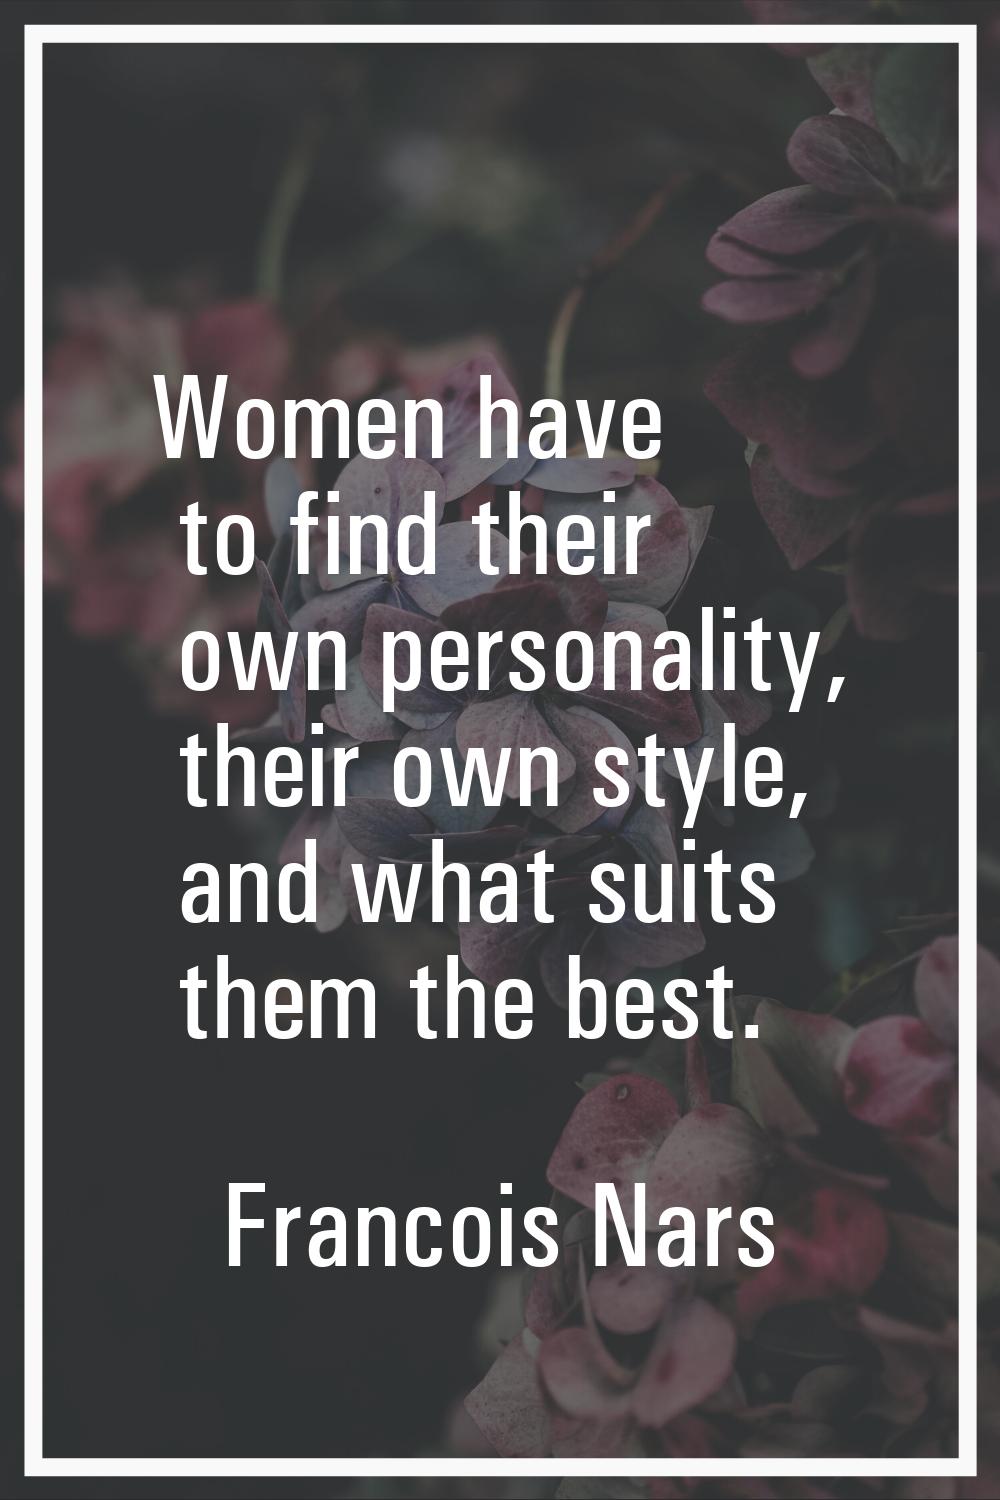 Women have to find their own personality, their own style, and what suits them the best.